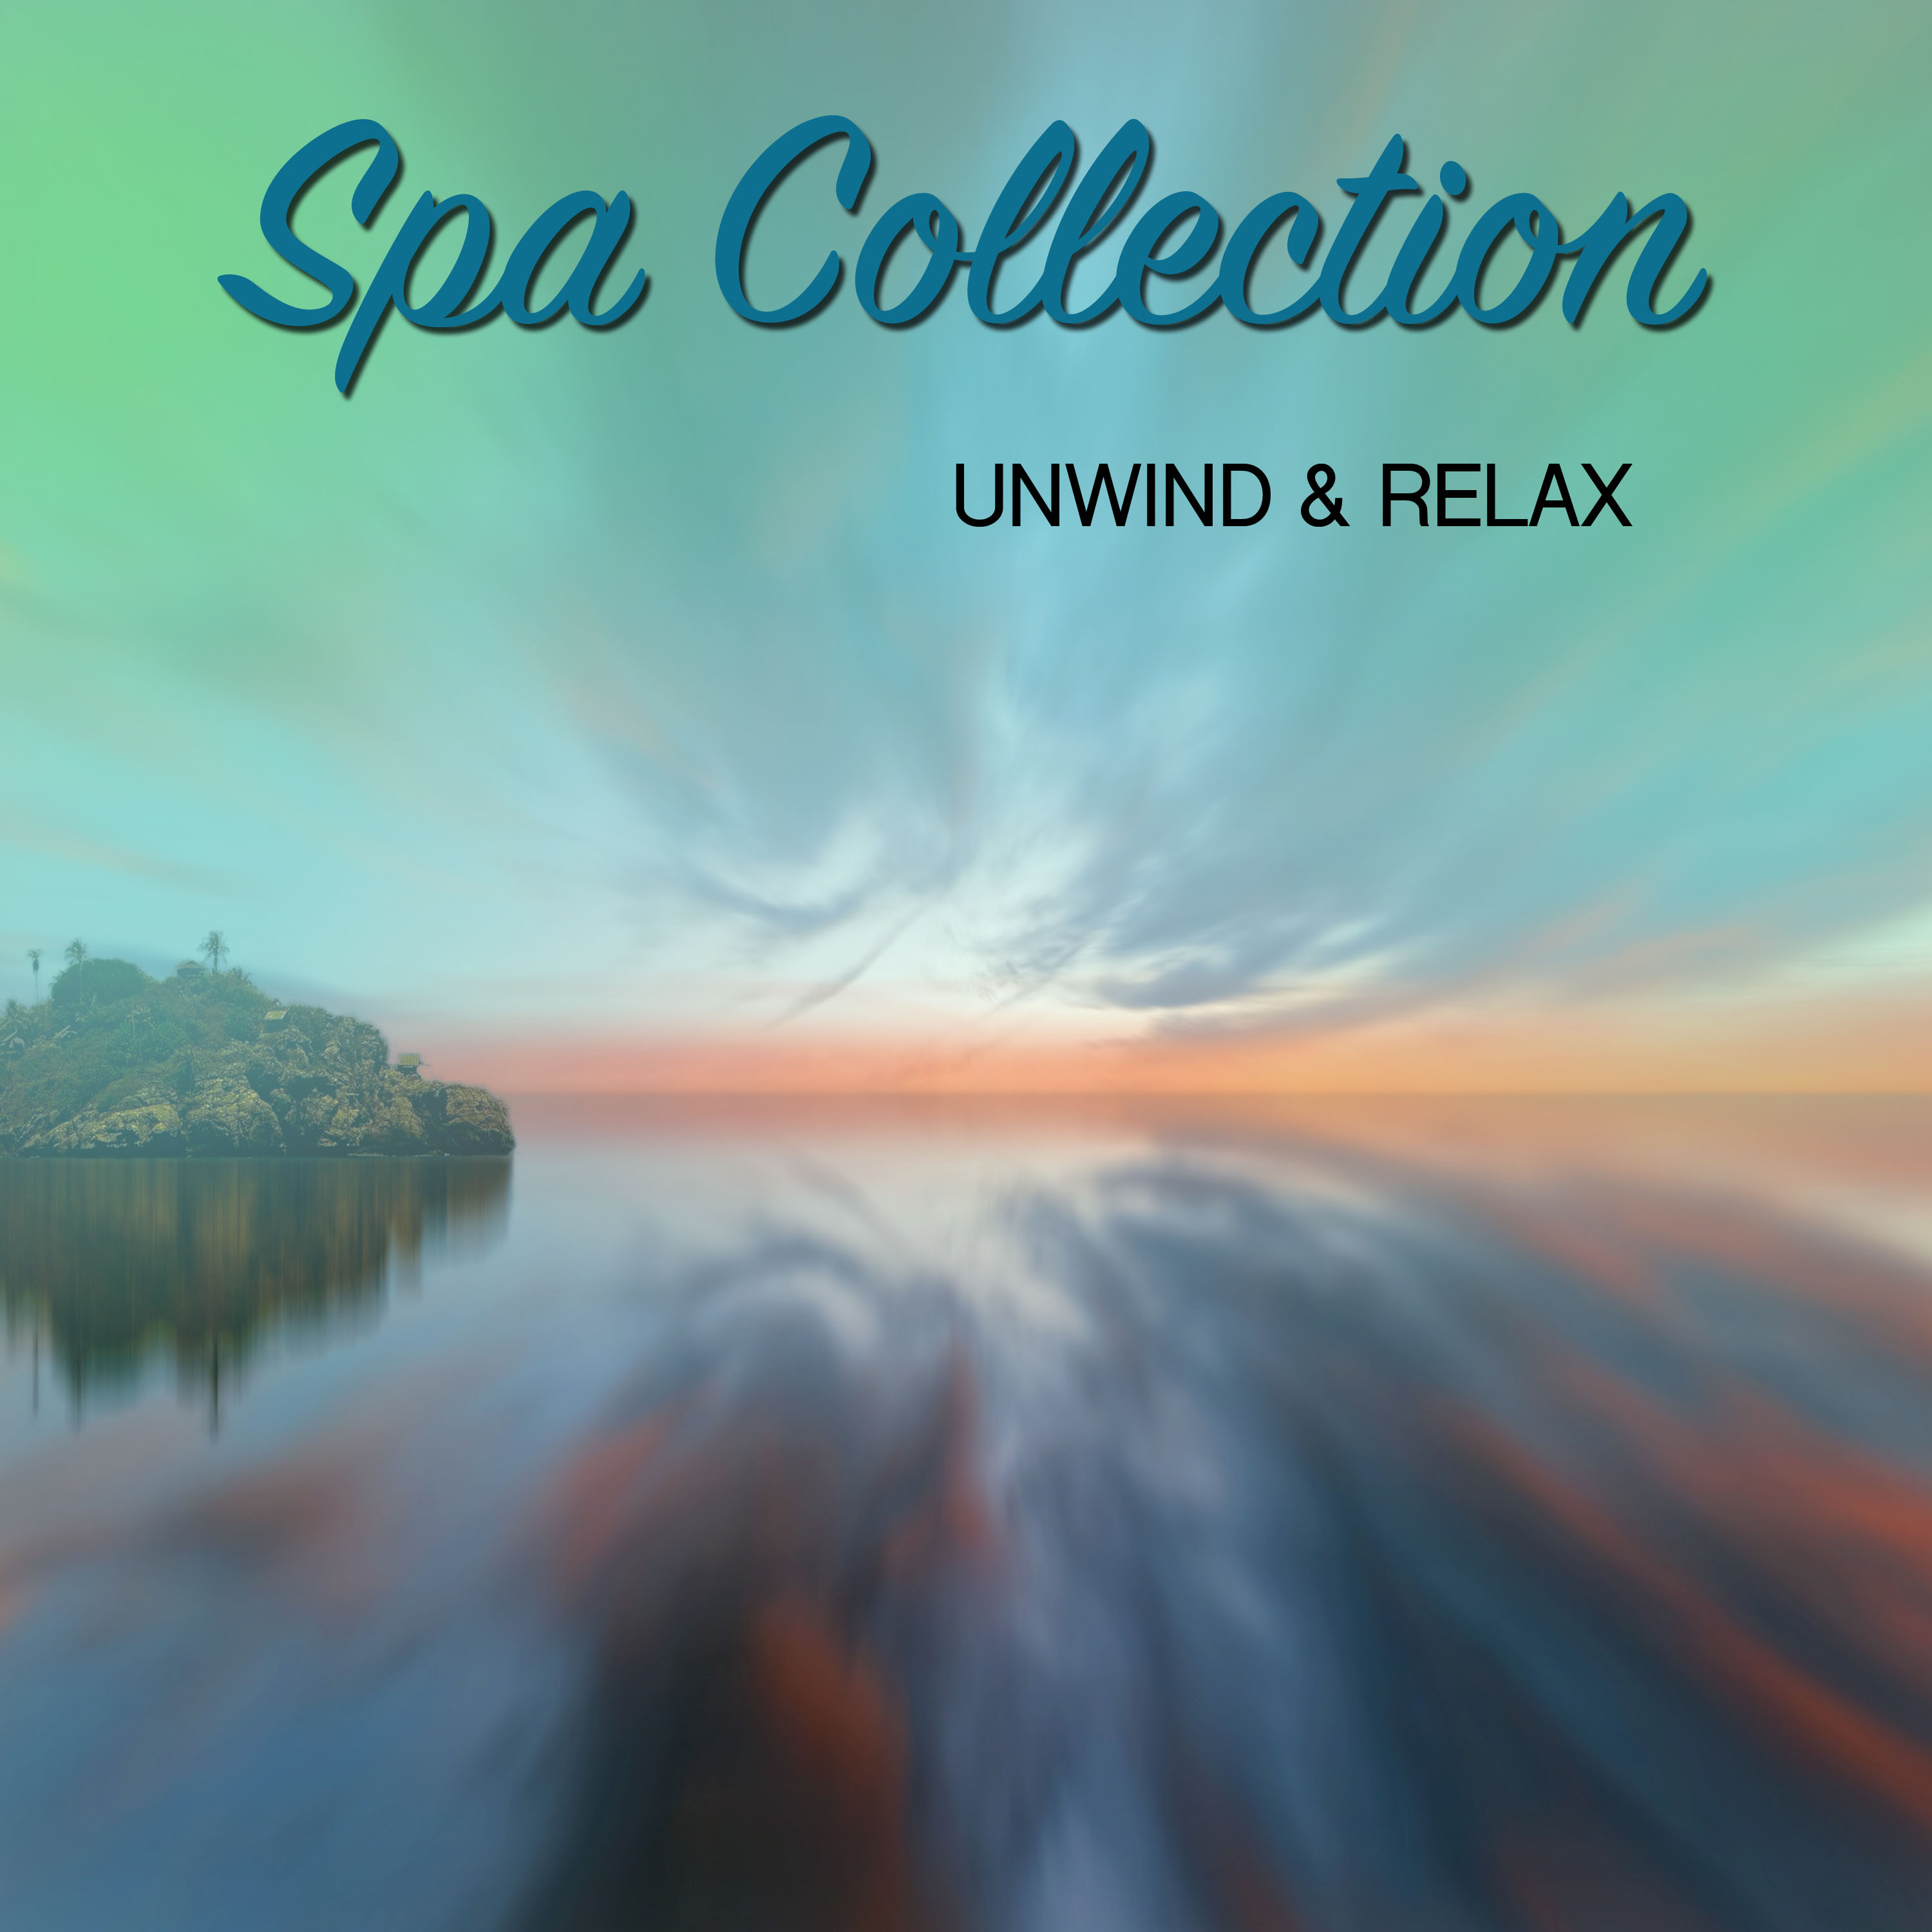 20 Songs to Unwind and Relax: Spa Collection